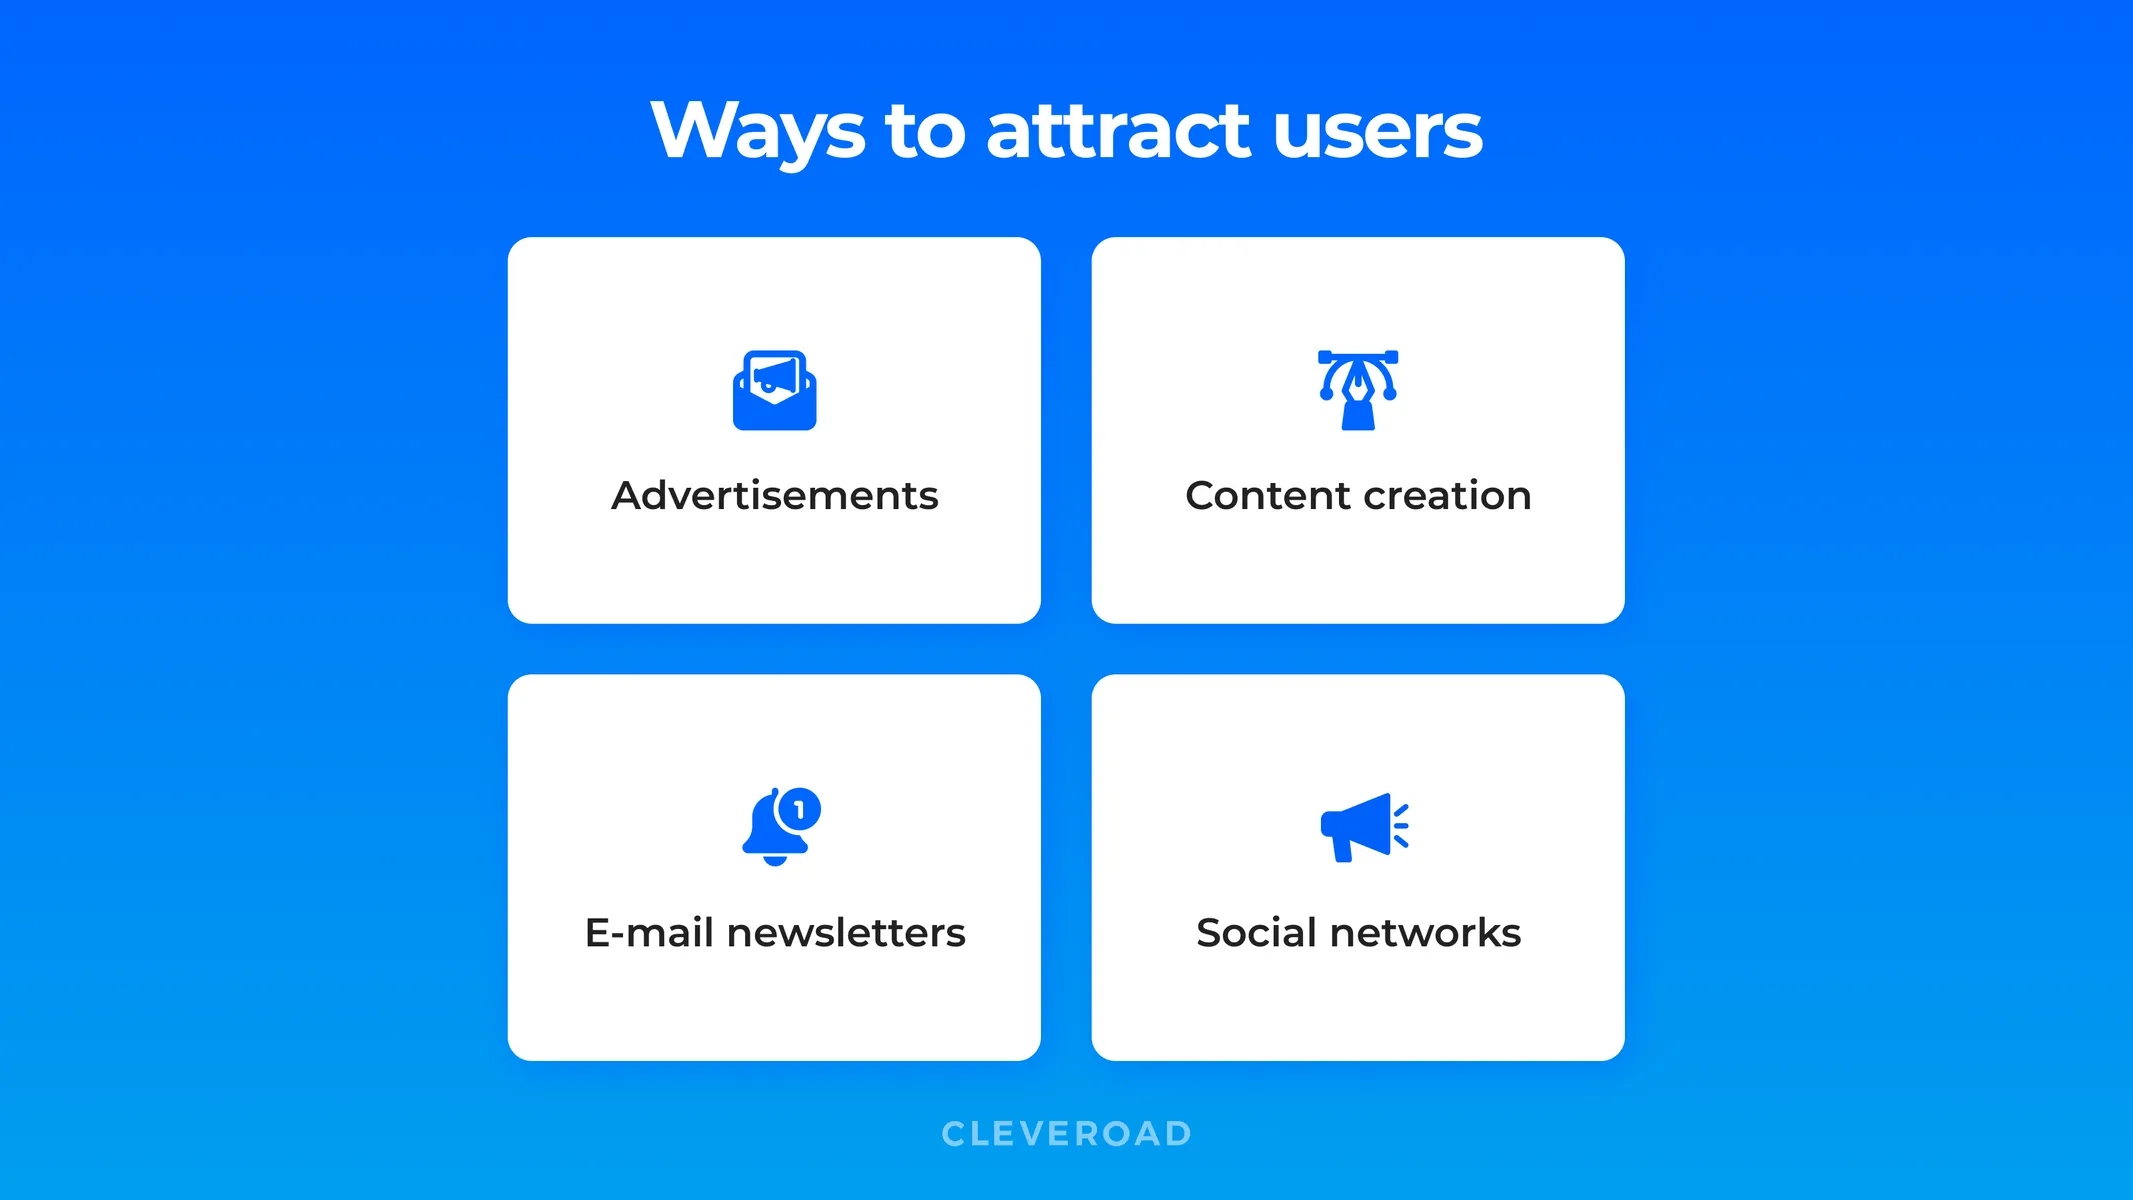 Q&A website. 4 Ways to Attract Users